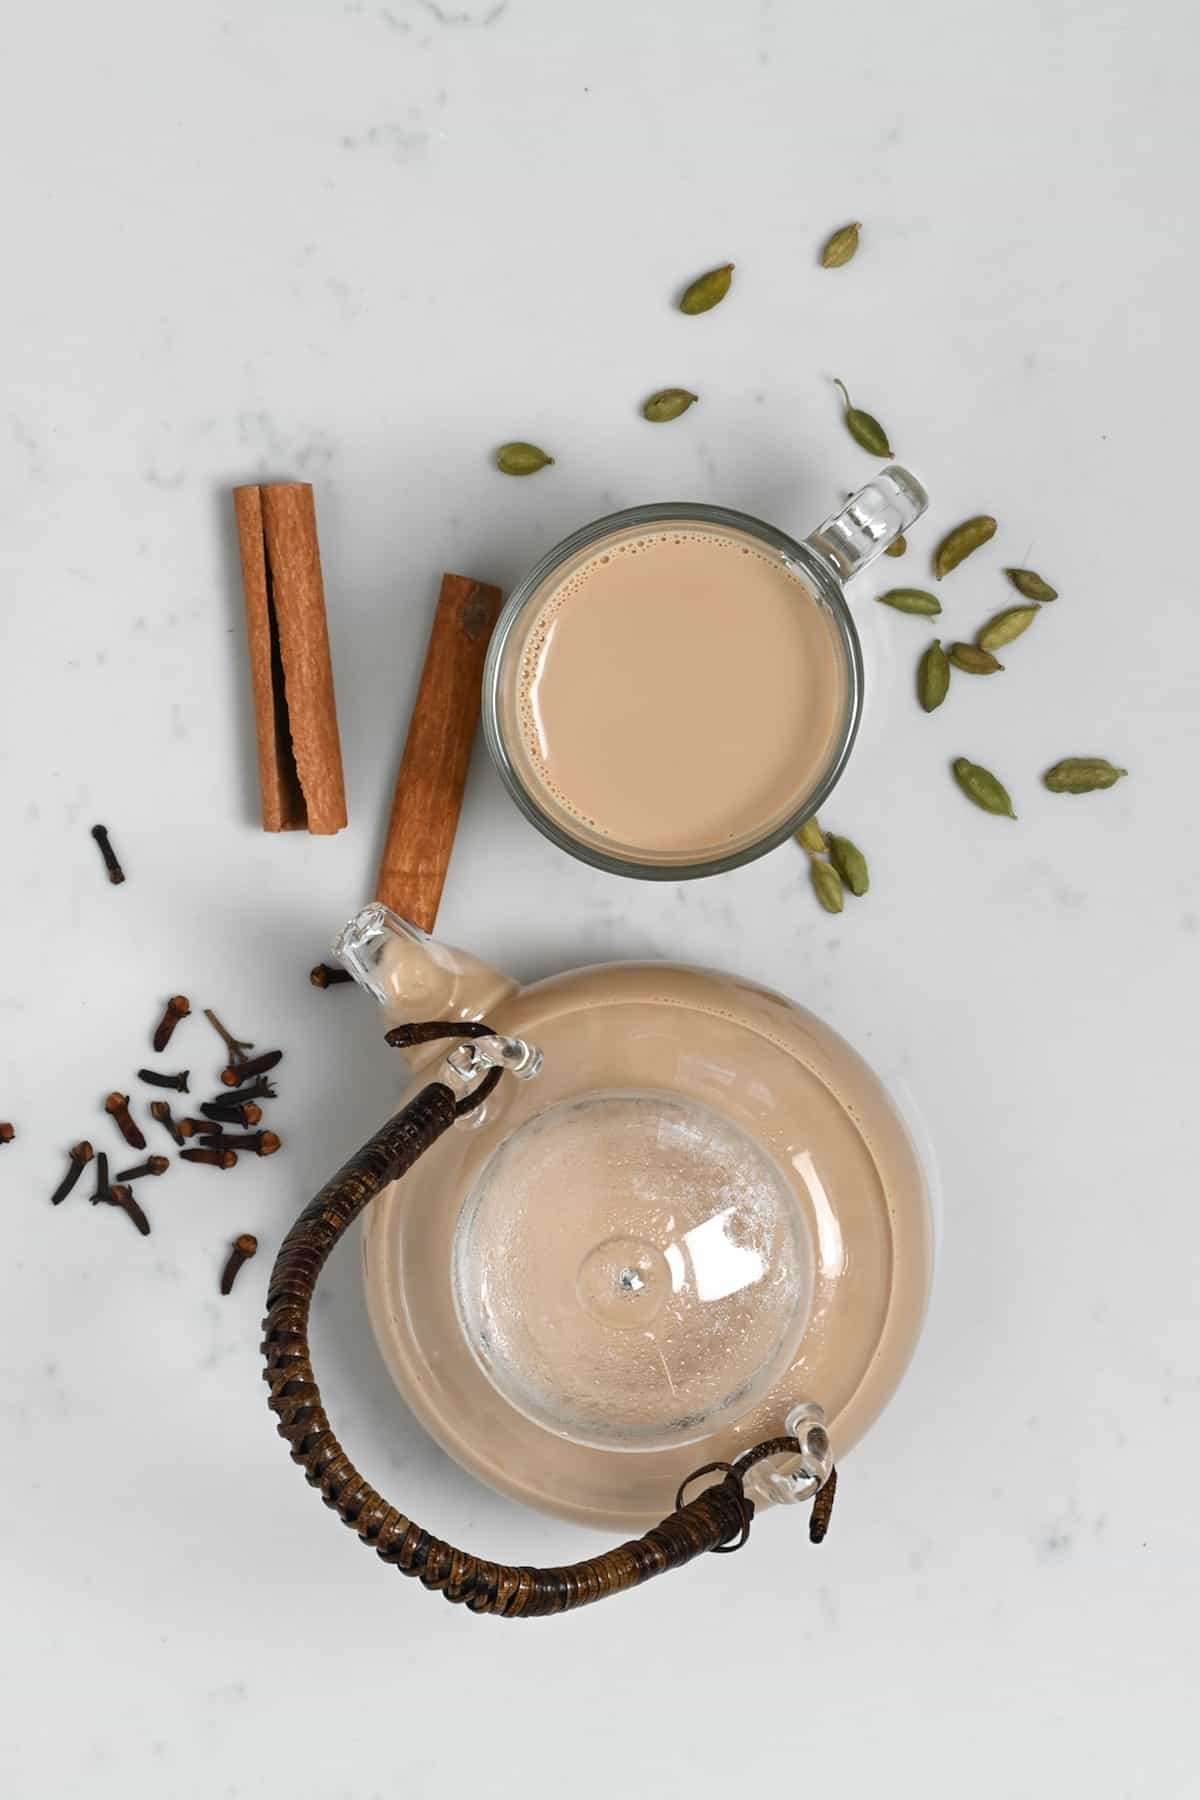 Masala chai in a tea pot and in a cup